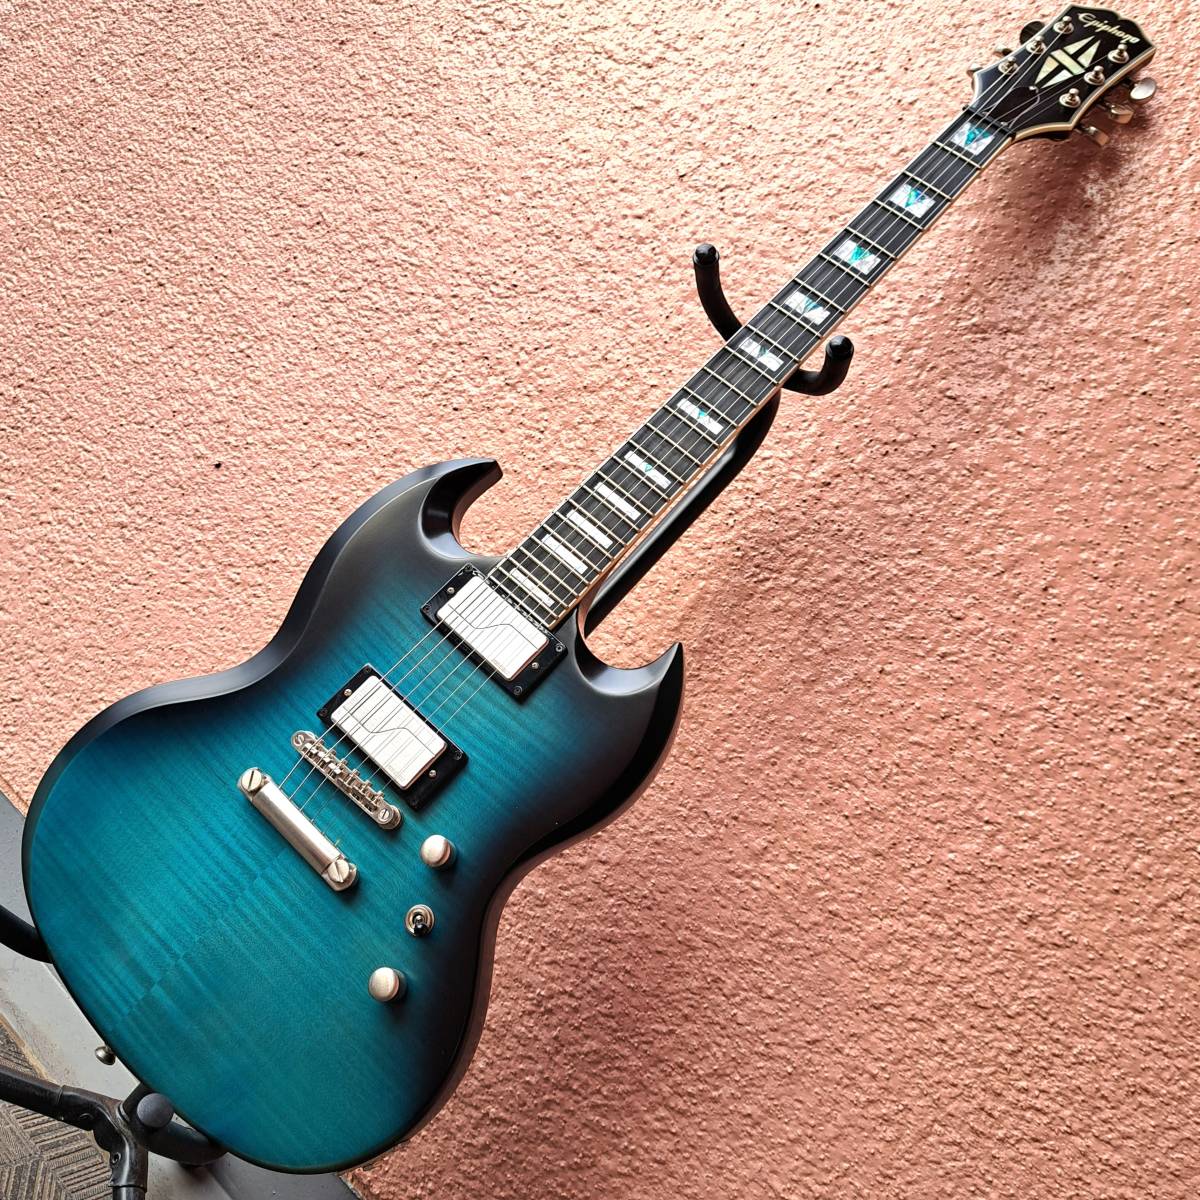 ■Epiphone SG Prophecy エピフォン プロフェシー 美品 Blue Tiger Aged Gloss 24F Ebony エボニー指板 Gibson ギブソン_画像1